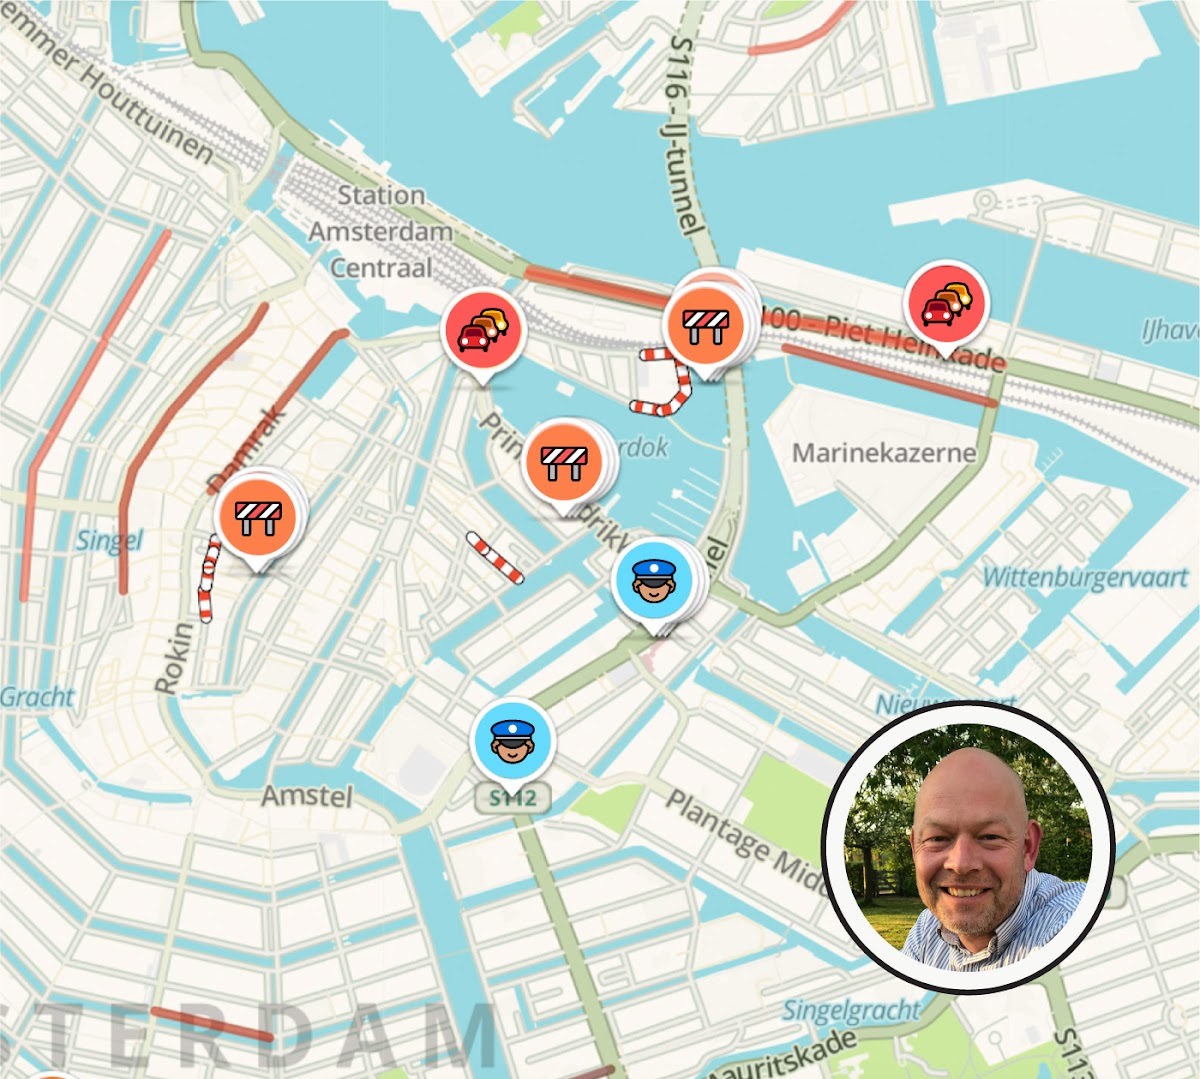 A map of Amsterdam Central with icons of construction marker, police officer, and cars in traffic visible on a several roads